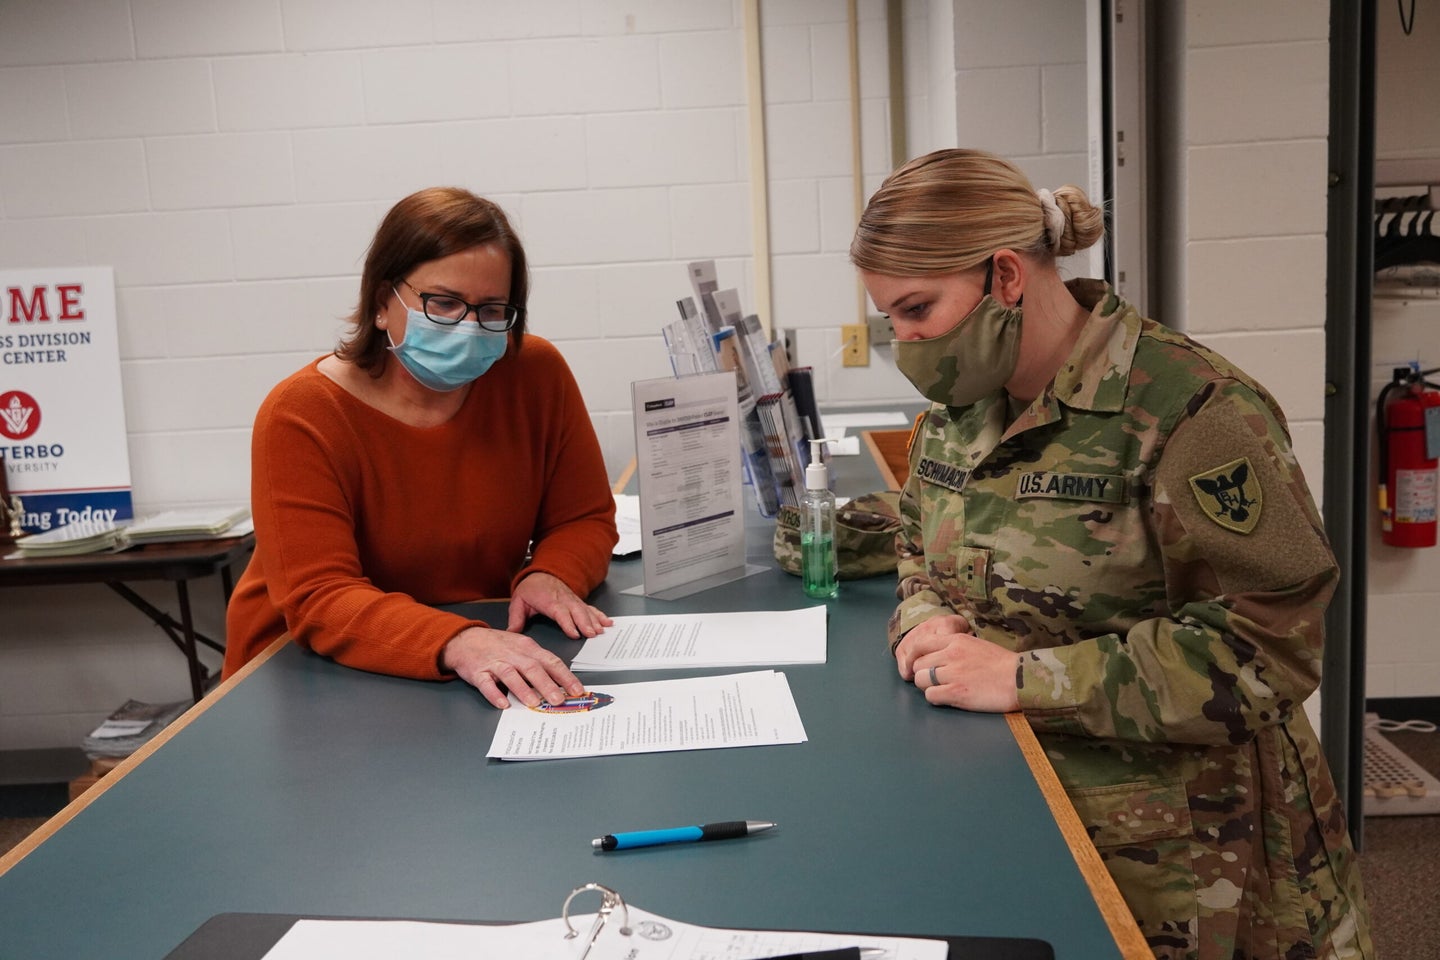 (From left) Connie Schauer, education services specialist with the 88th Readiness Division, and Chief Warrant Officer 2 Autumn Schumacker, a human resources technician with the 86th Training Division, discuss education funding options. (U.S. Army Photo by Cheryl Phillips)